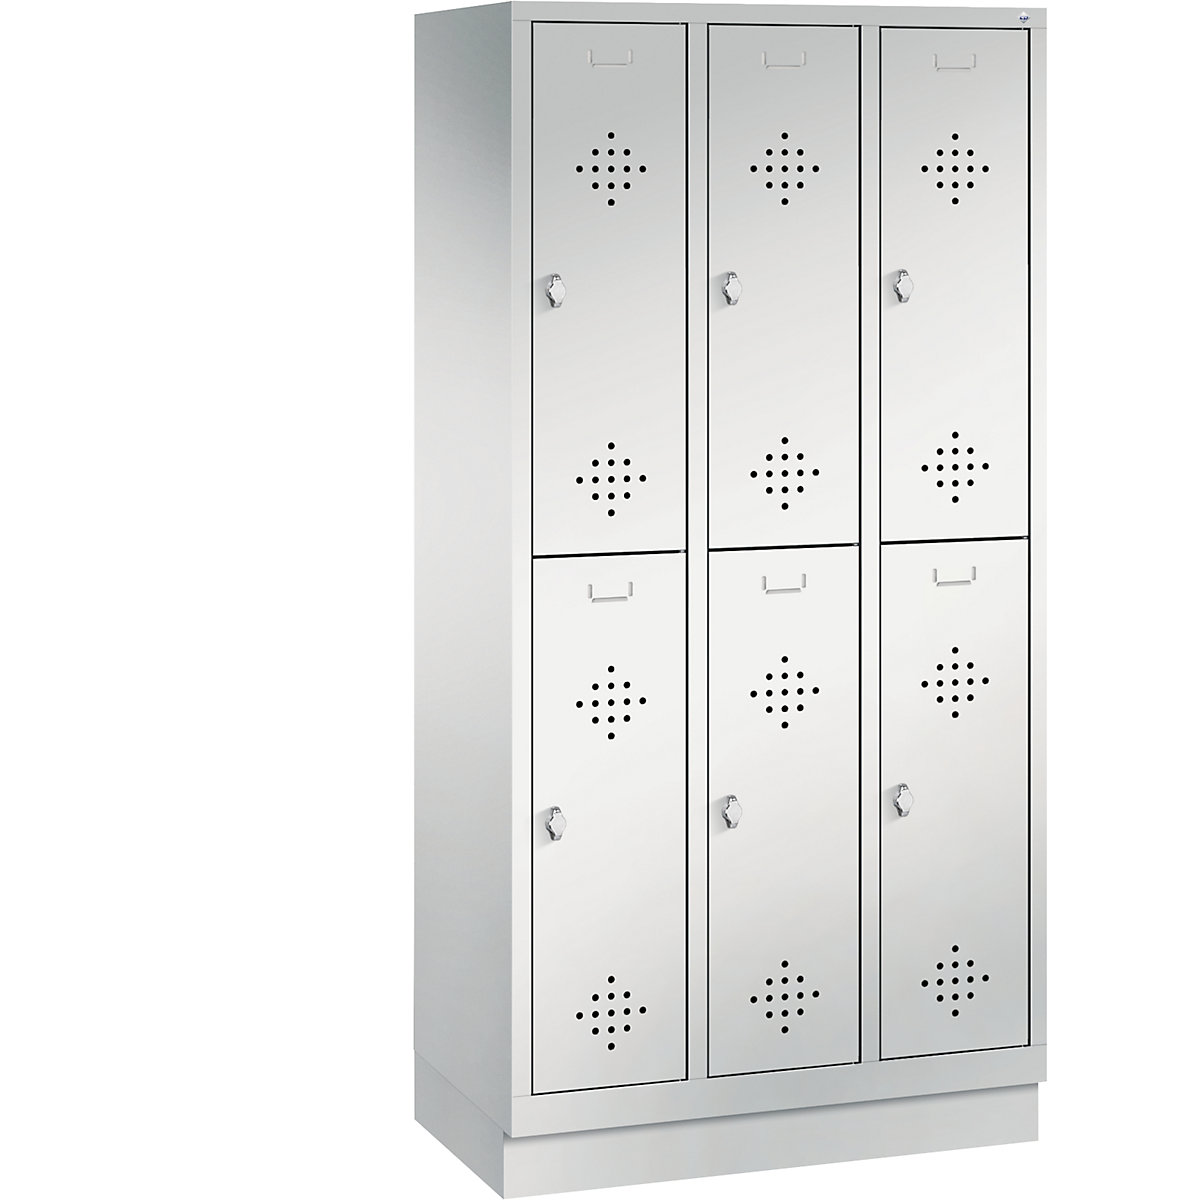 CLASSIC cloakroom locker with plinth, double tier – C+P, 3 compartments, 2 shelf compartments each, compartment width 300 mm, light grey-10